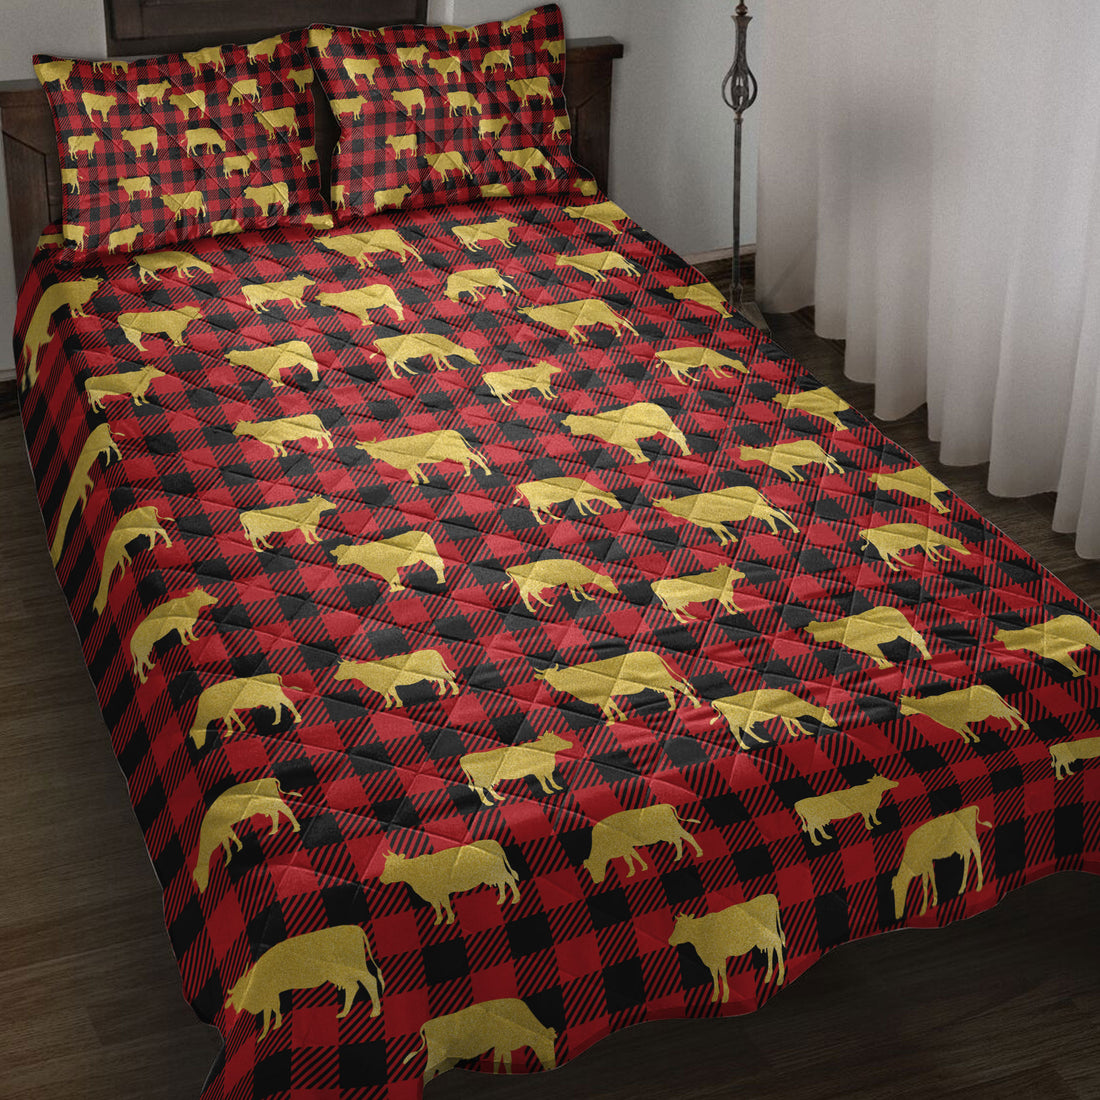 Ohaprints-Quilt-Bed-Set-Pillowcase-Gold-Glitter-Christmas-Red-Buffalo-Plaid-Pattern-Blanket-Bedspread-Bedding-4019-Throw (55'' x 60'')